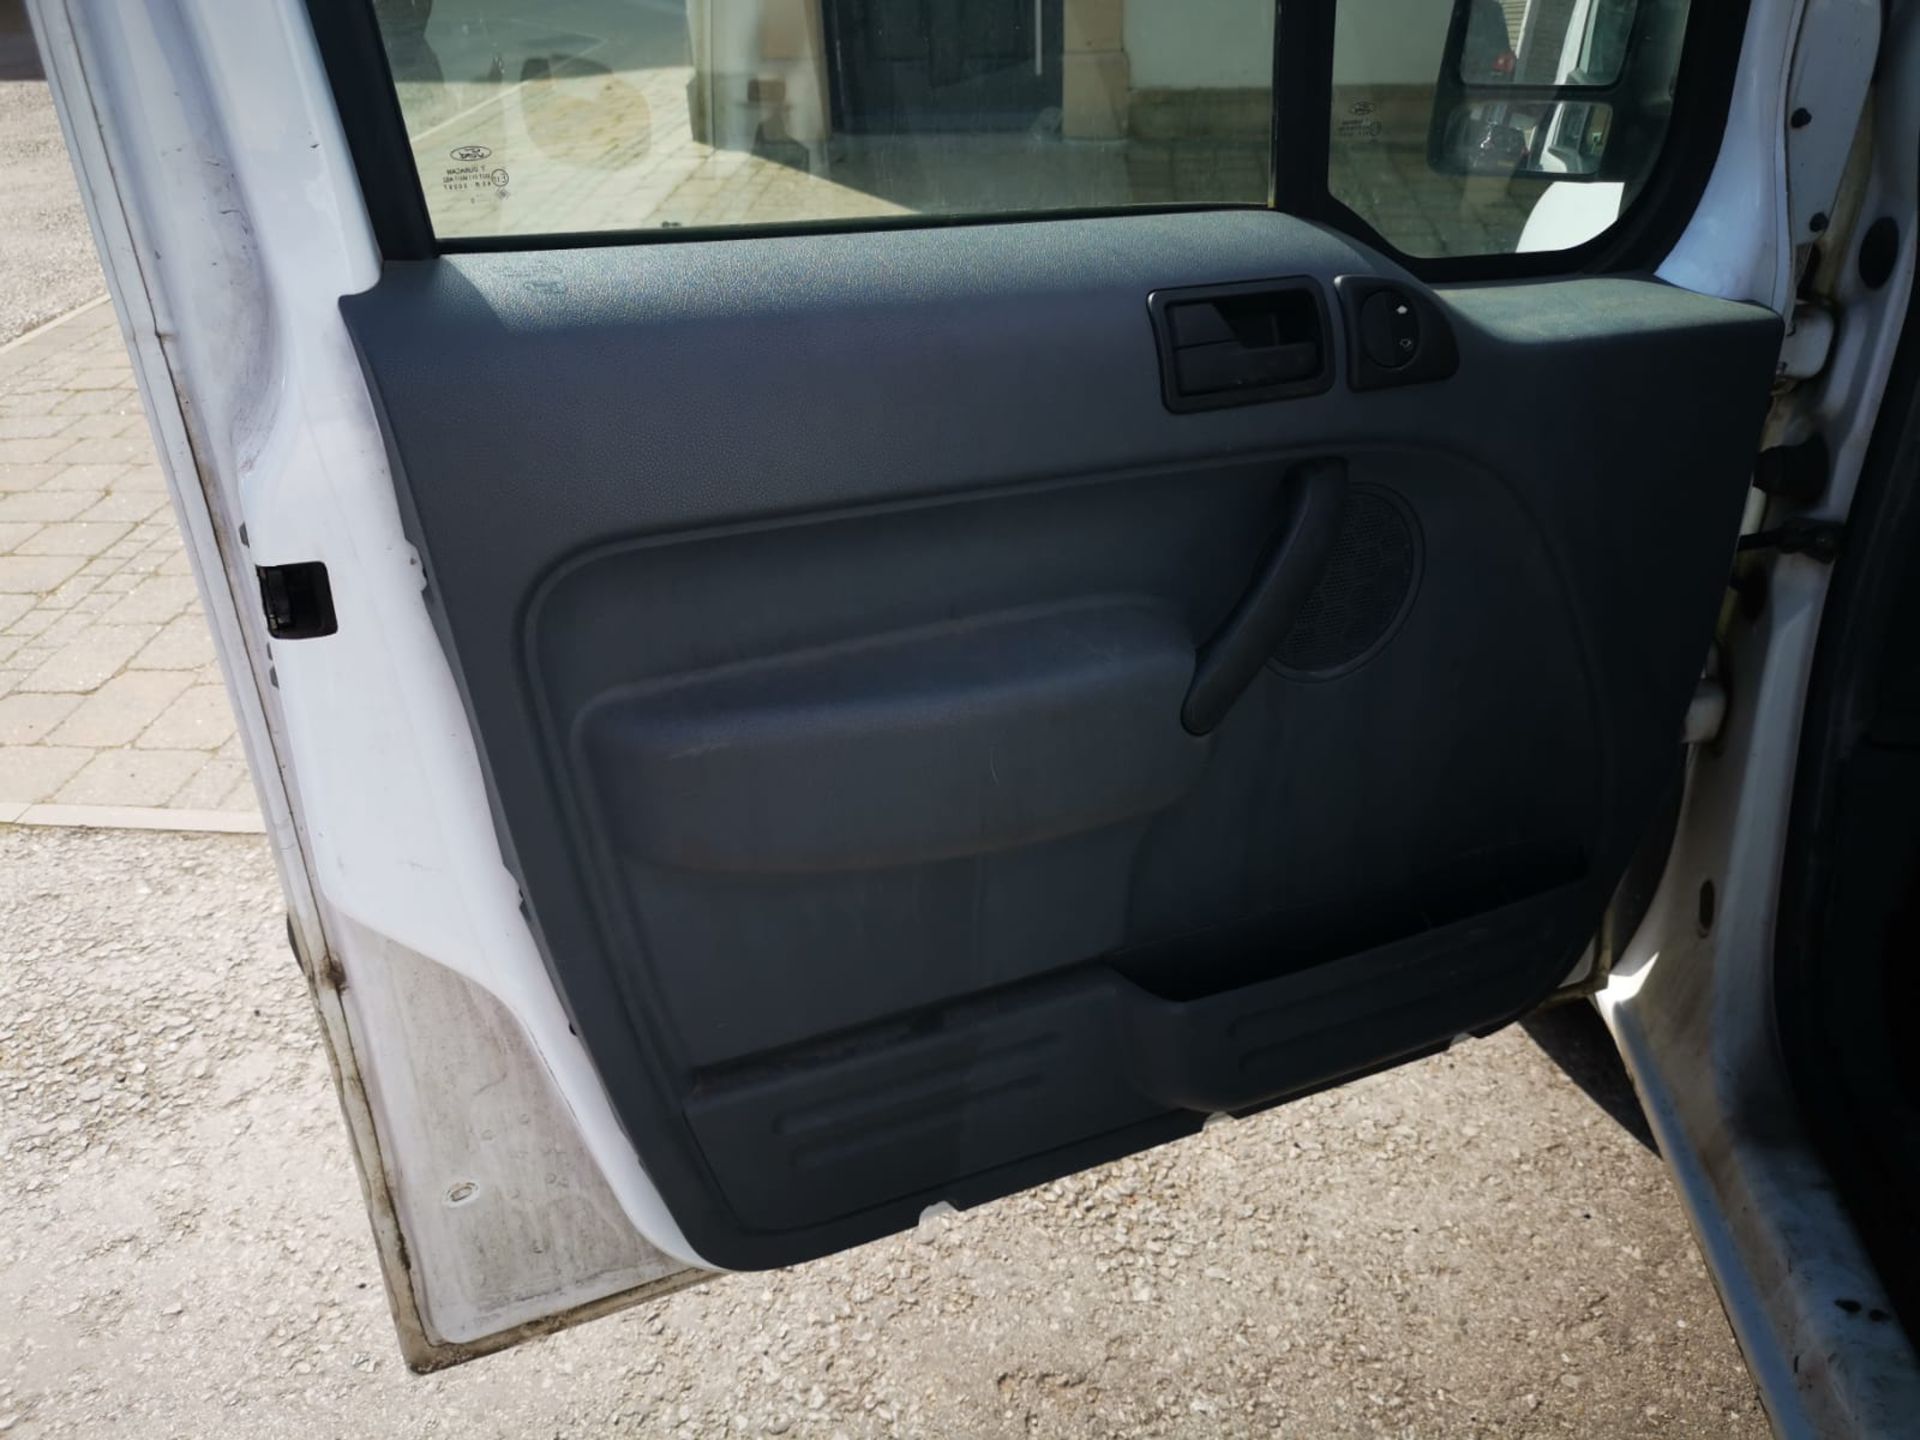 ENTRY DIRECT FROM LOCAL AUTHORITY Ford Transit Connect 75 T200 - Image 17 of 27